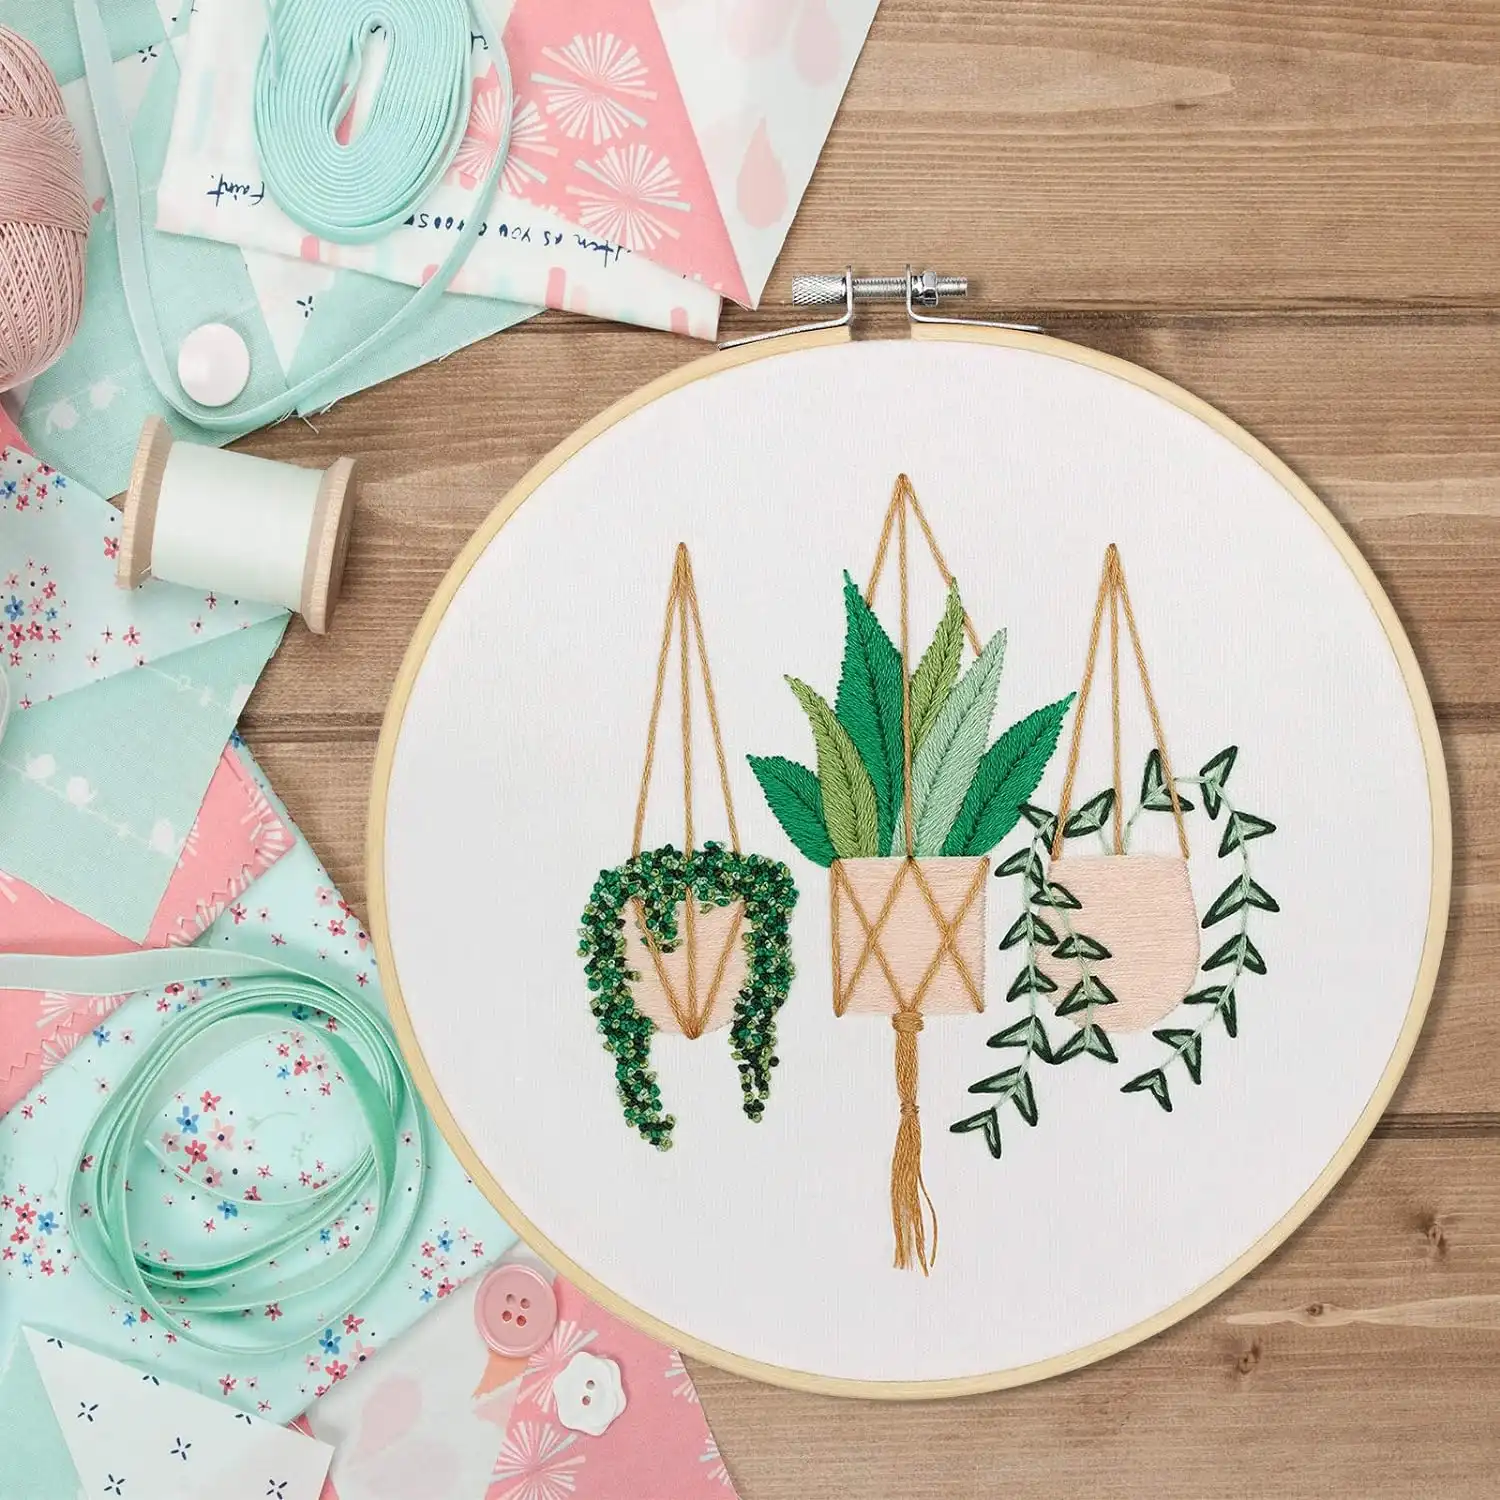 Embroidery Starter Kit with Pattern